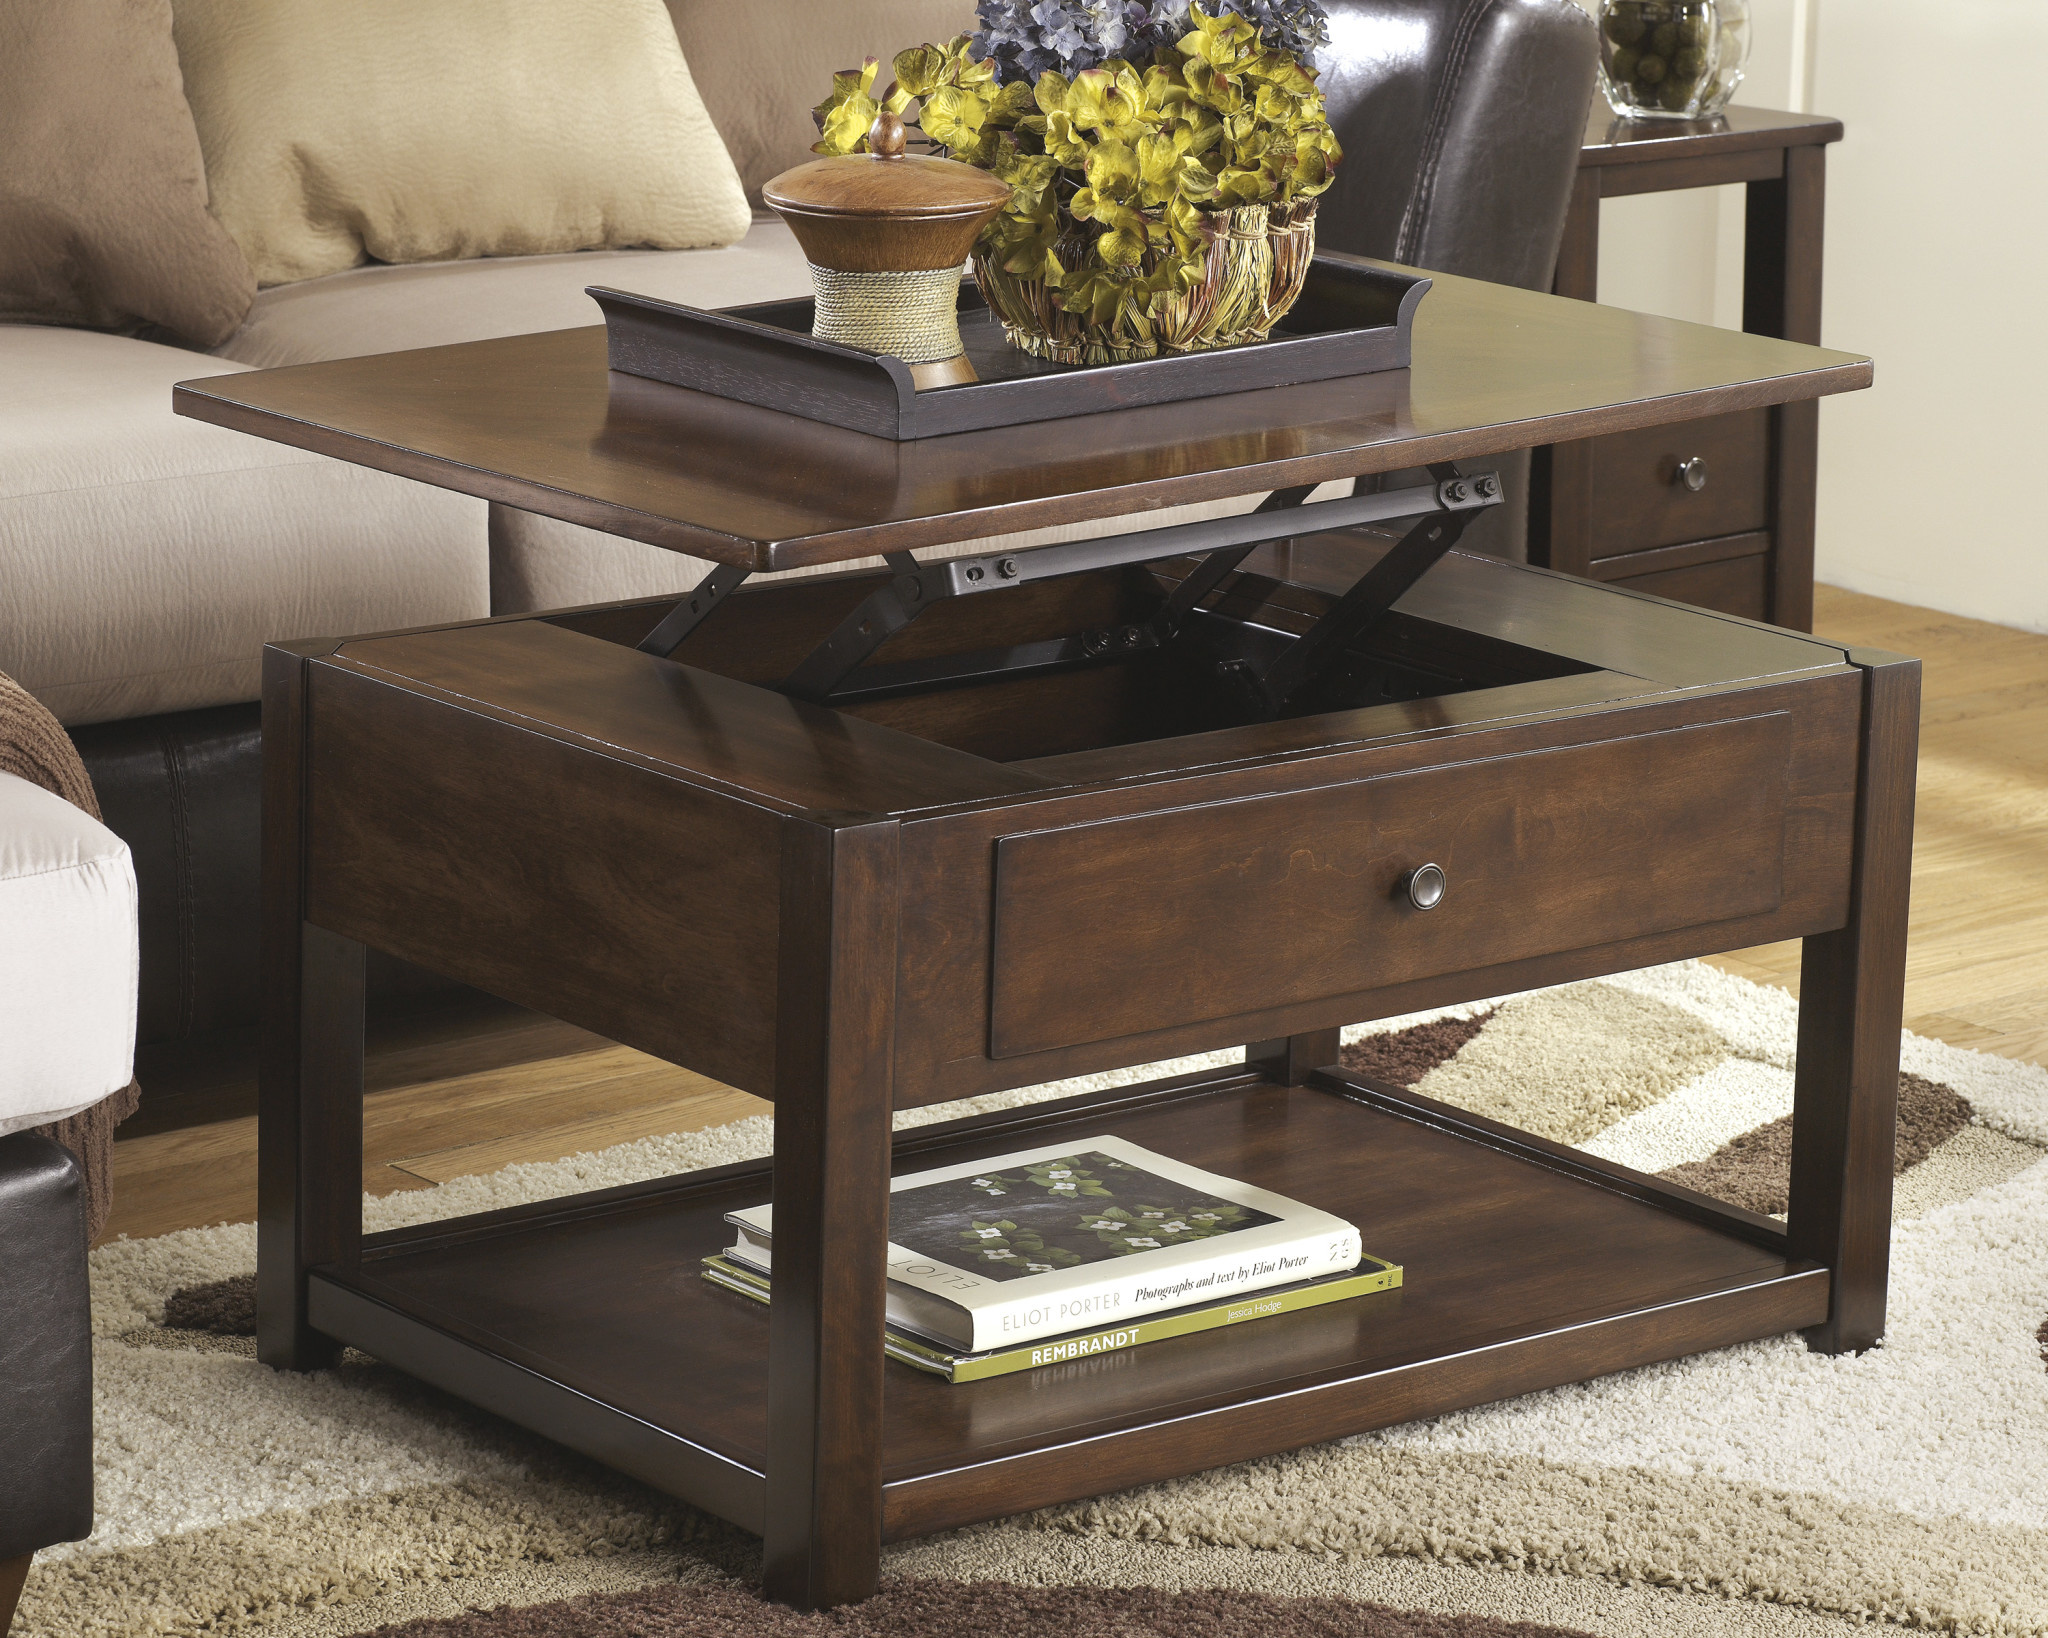 Signature Design "Marion" Coffee Table w/Lift Top- Dark Brown- T477-9